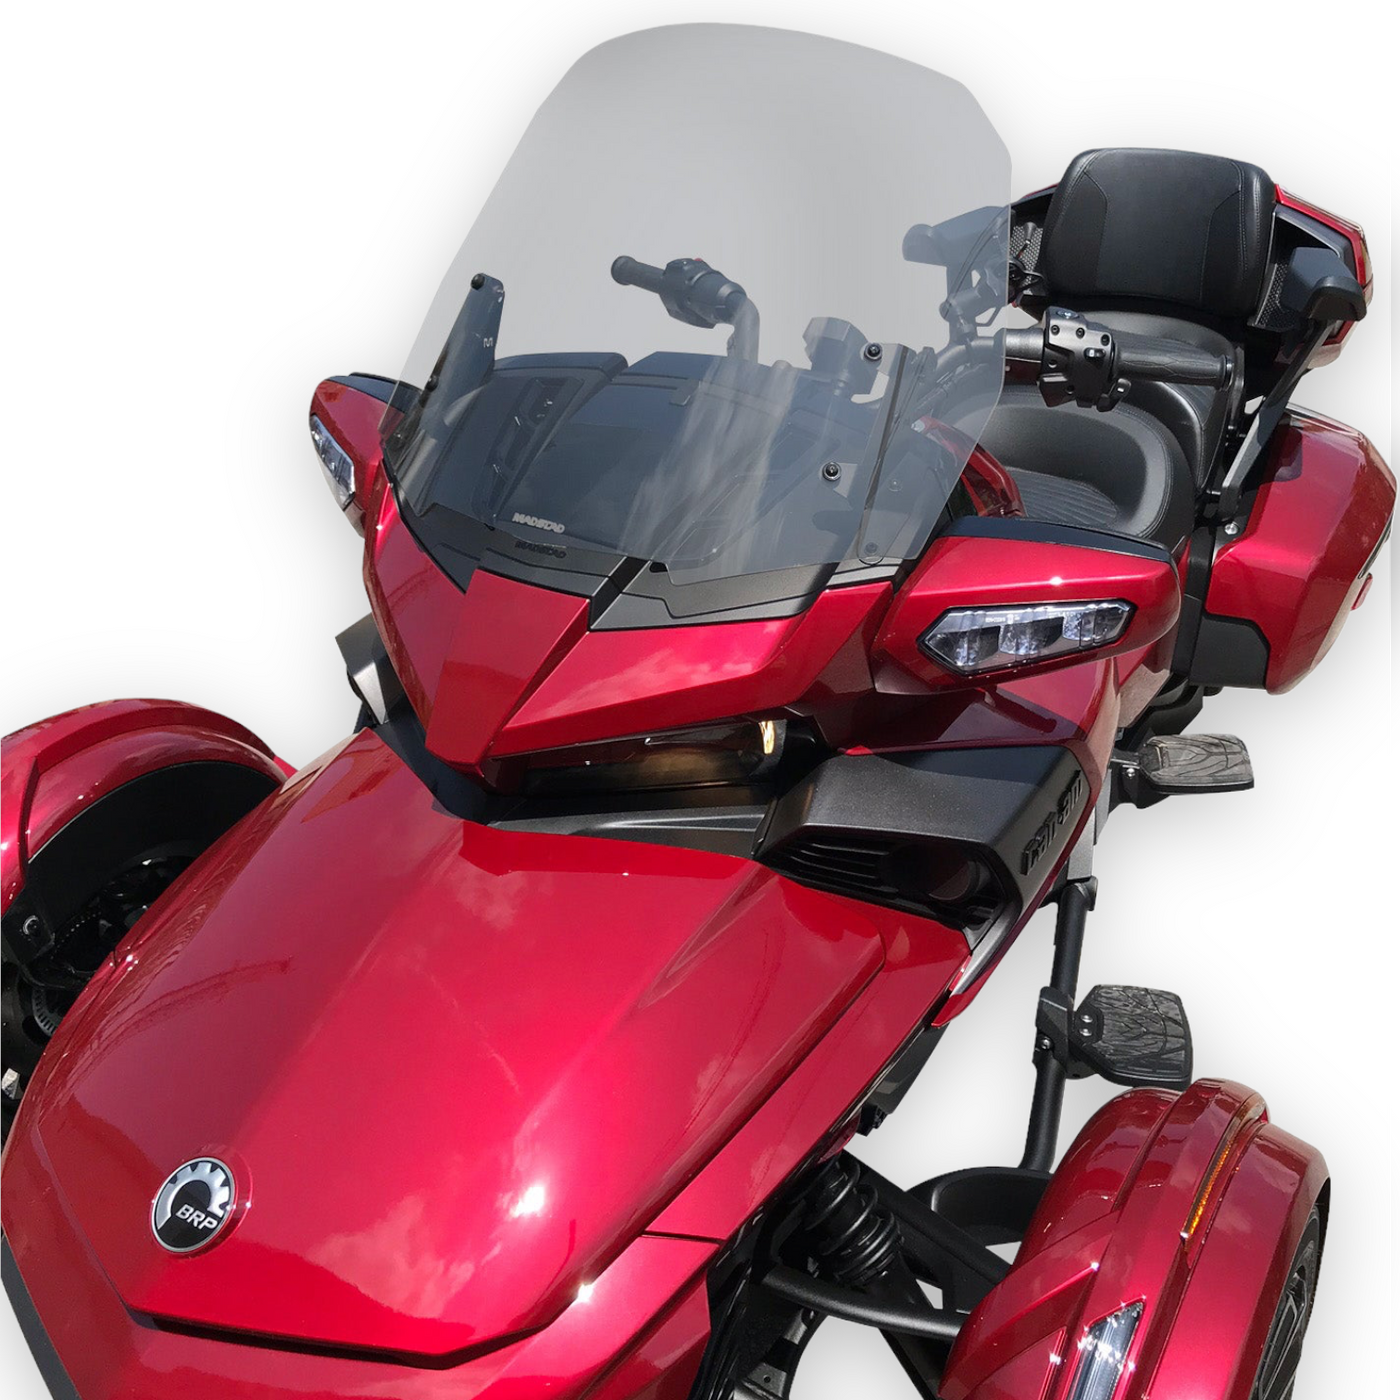 CERTIFIED PRE-OWNED - 20" Clear Adjustable Windshield System for Can-Am Spyder F3-T/LTD (2016 & Up)